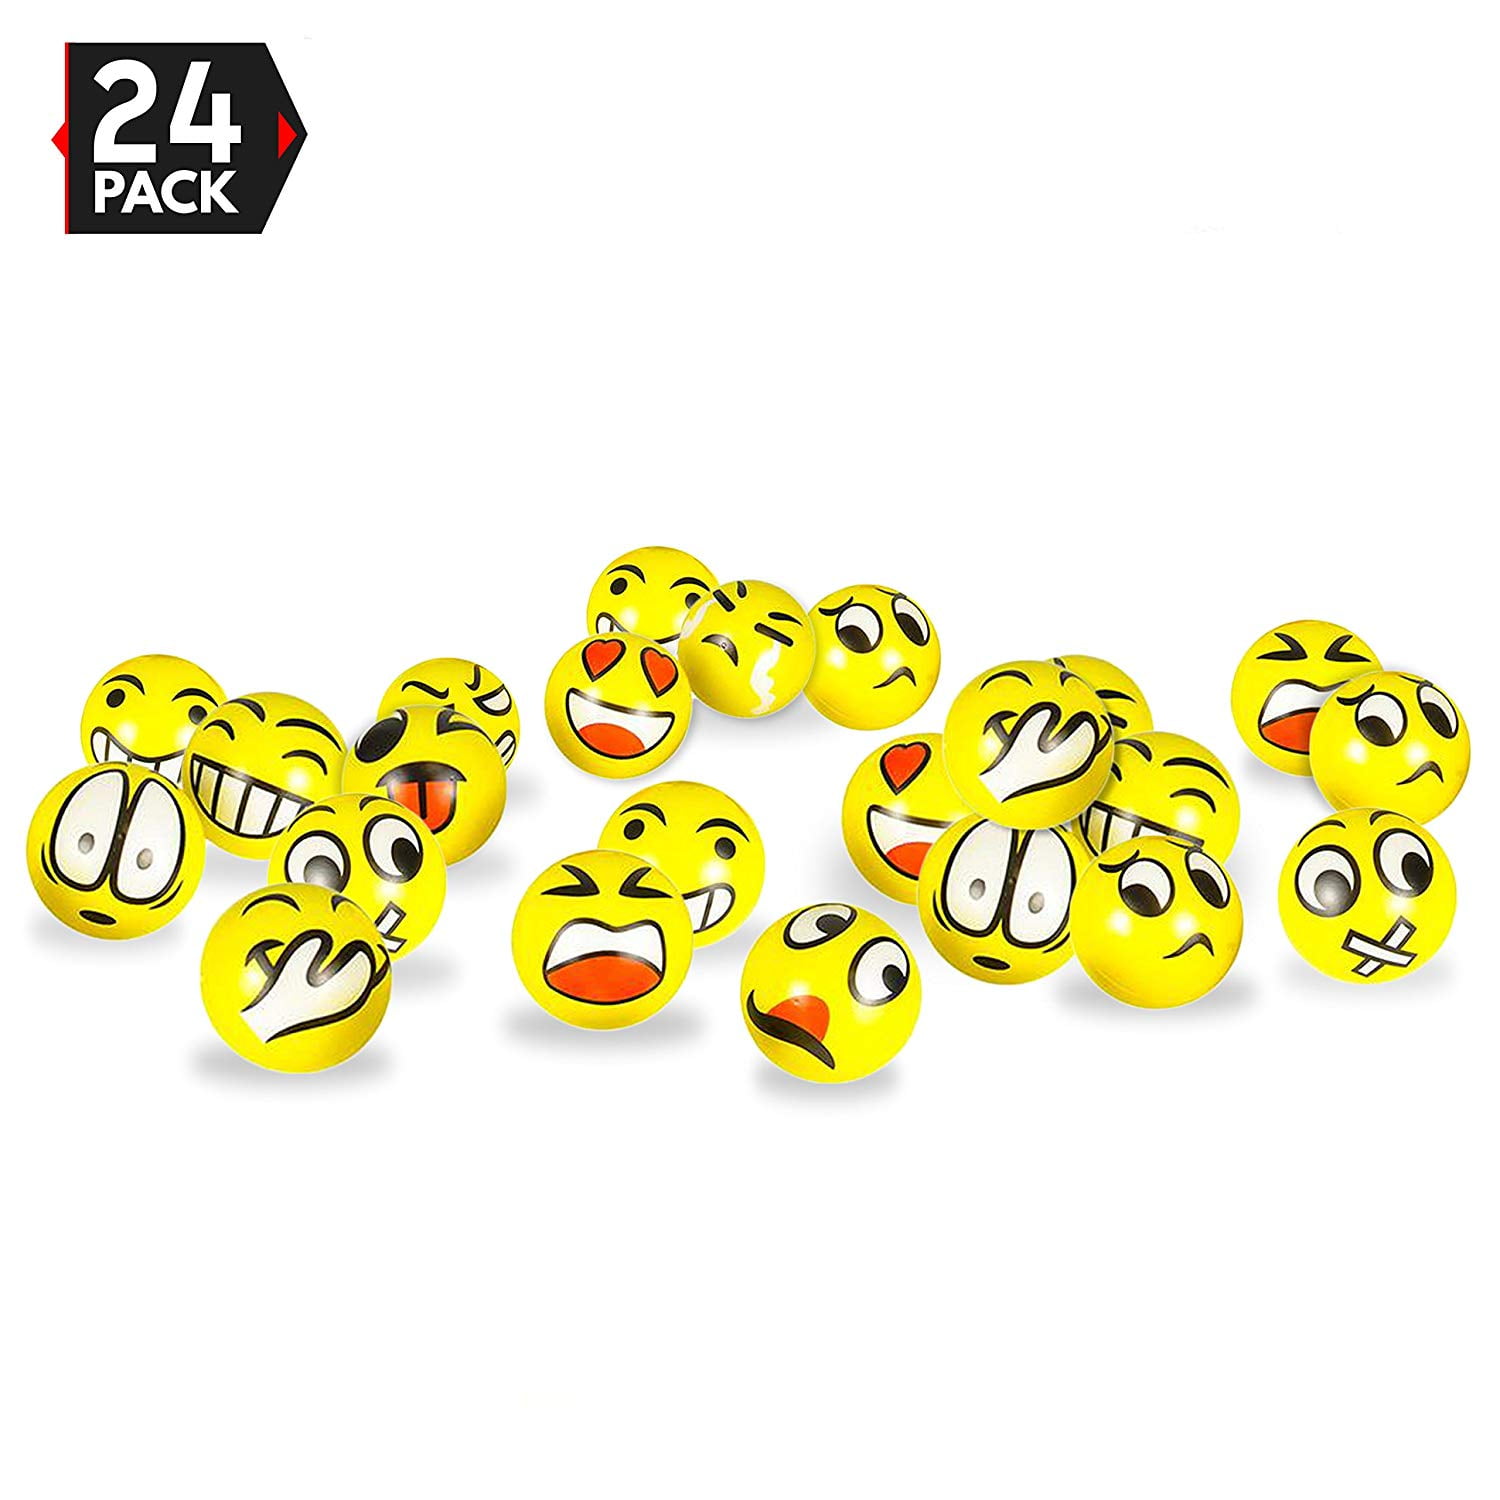 6ct Emoji Bouncy Ball Party Favors